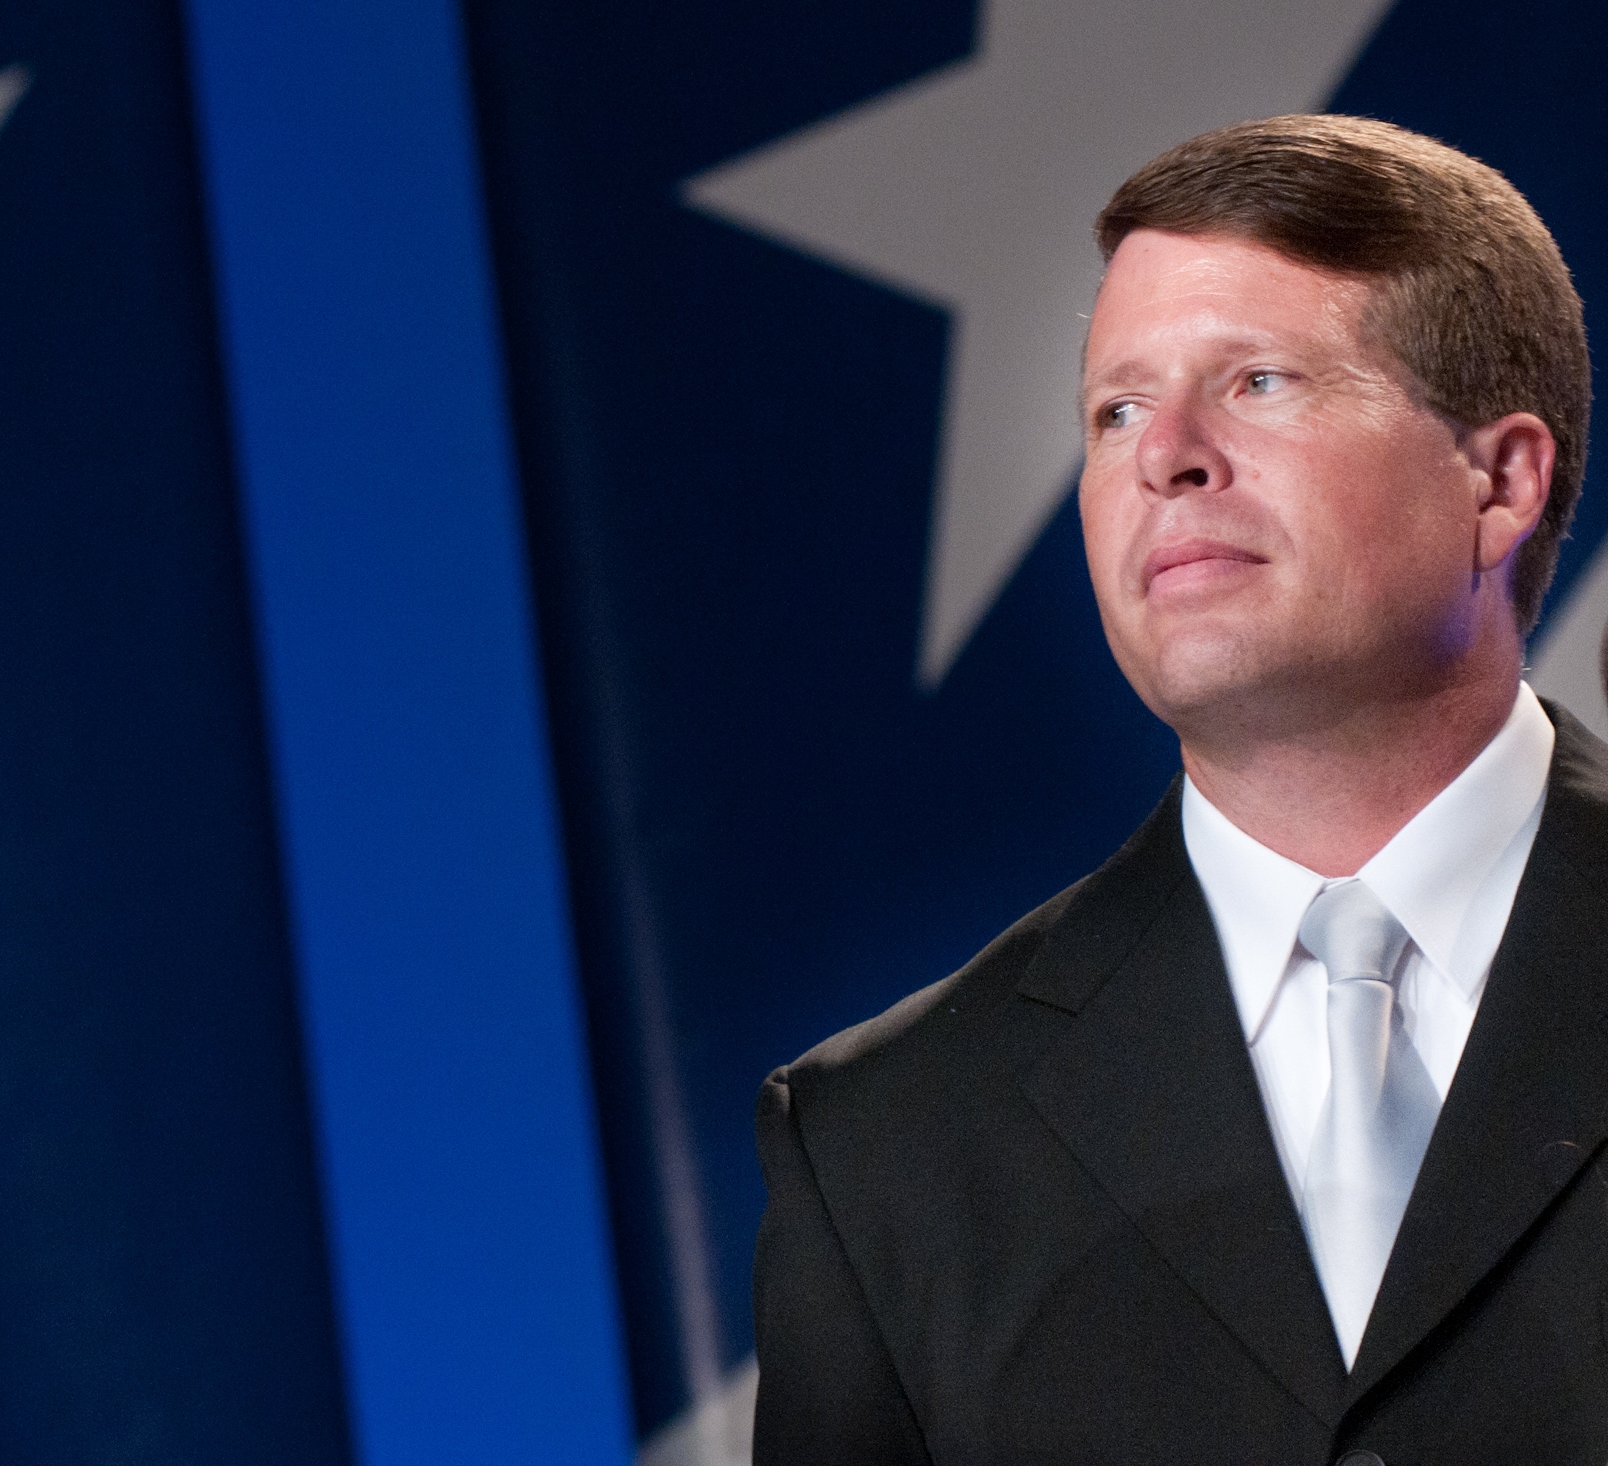 Jim Bob Duggar pictured at an event in September 2010